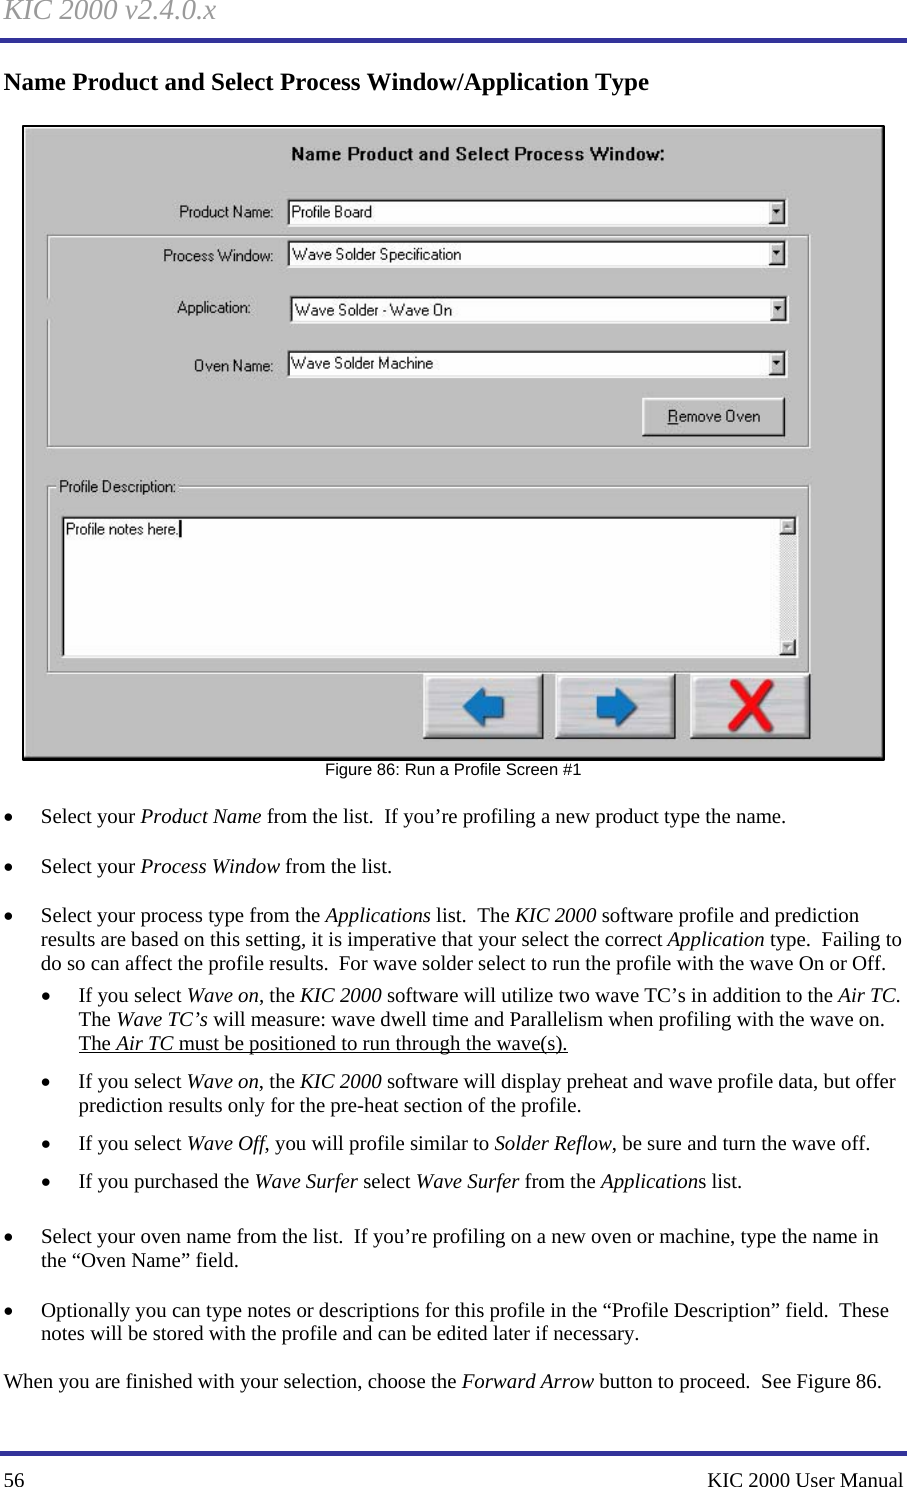 KIC 2000 v2.4.0.x 56    KIC 2000 User Manual Name Product and Select Process Window/Application Type   Figure 86: Run a Profile Screen #1  • Select your Product Name from the list.  If you’re profiling a new product type the name.  • Select your Process Window from the list.  • Select your process type from the Applications list.  The KIC 2000 software profile and prediction results are based on this setting, it is imperative that your select the correct Application type.  Failing to do so can affect the profile results.  For wave solder select to run the profile with the wave On or Off. • If you select Wave on, the KIC 2000 software will utilize two wave TC’s in addition to the Air TC.  The Wave TC’s will measure: wave dwell time and Parallelism when profiling with the wave on.  The Air TC must be positioned to run through the wave(s). • If you select Wave on, the KIC 2000 software will display preheat and wave profile data, but offer prediction results only for the pre-heat section of the profile. • If you select Wave Off, you will profile similar to Solder Reflow, be sure and turn the wave off. • If you purchased the Wave Surfer select Wave Surfer from the Applications list.    • Select your oven name from the list.  If you’re profiling on a new oven or machine, type the name in the “Oven Name” field.  • Optionally you can type notes or descriptions for this profile in the “Profile Description” field.  These notes will be stored with the profile and can be edited later if necessary.  When you are finished with your selection, choose the Forward Arrow button to proceed.  See Figure 86.   